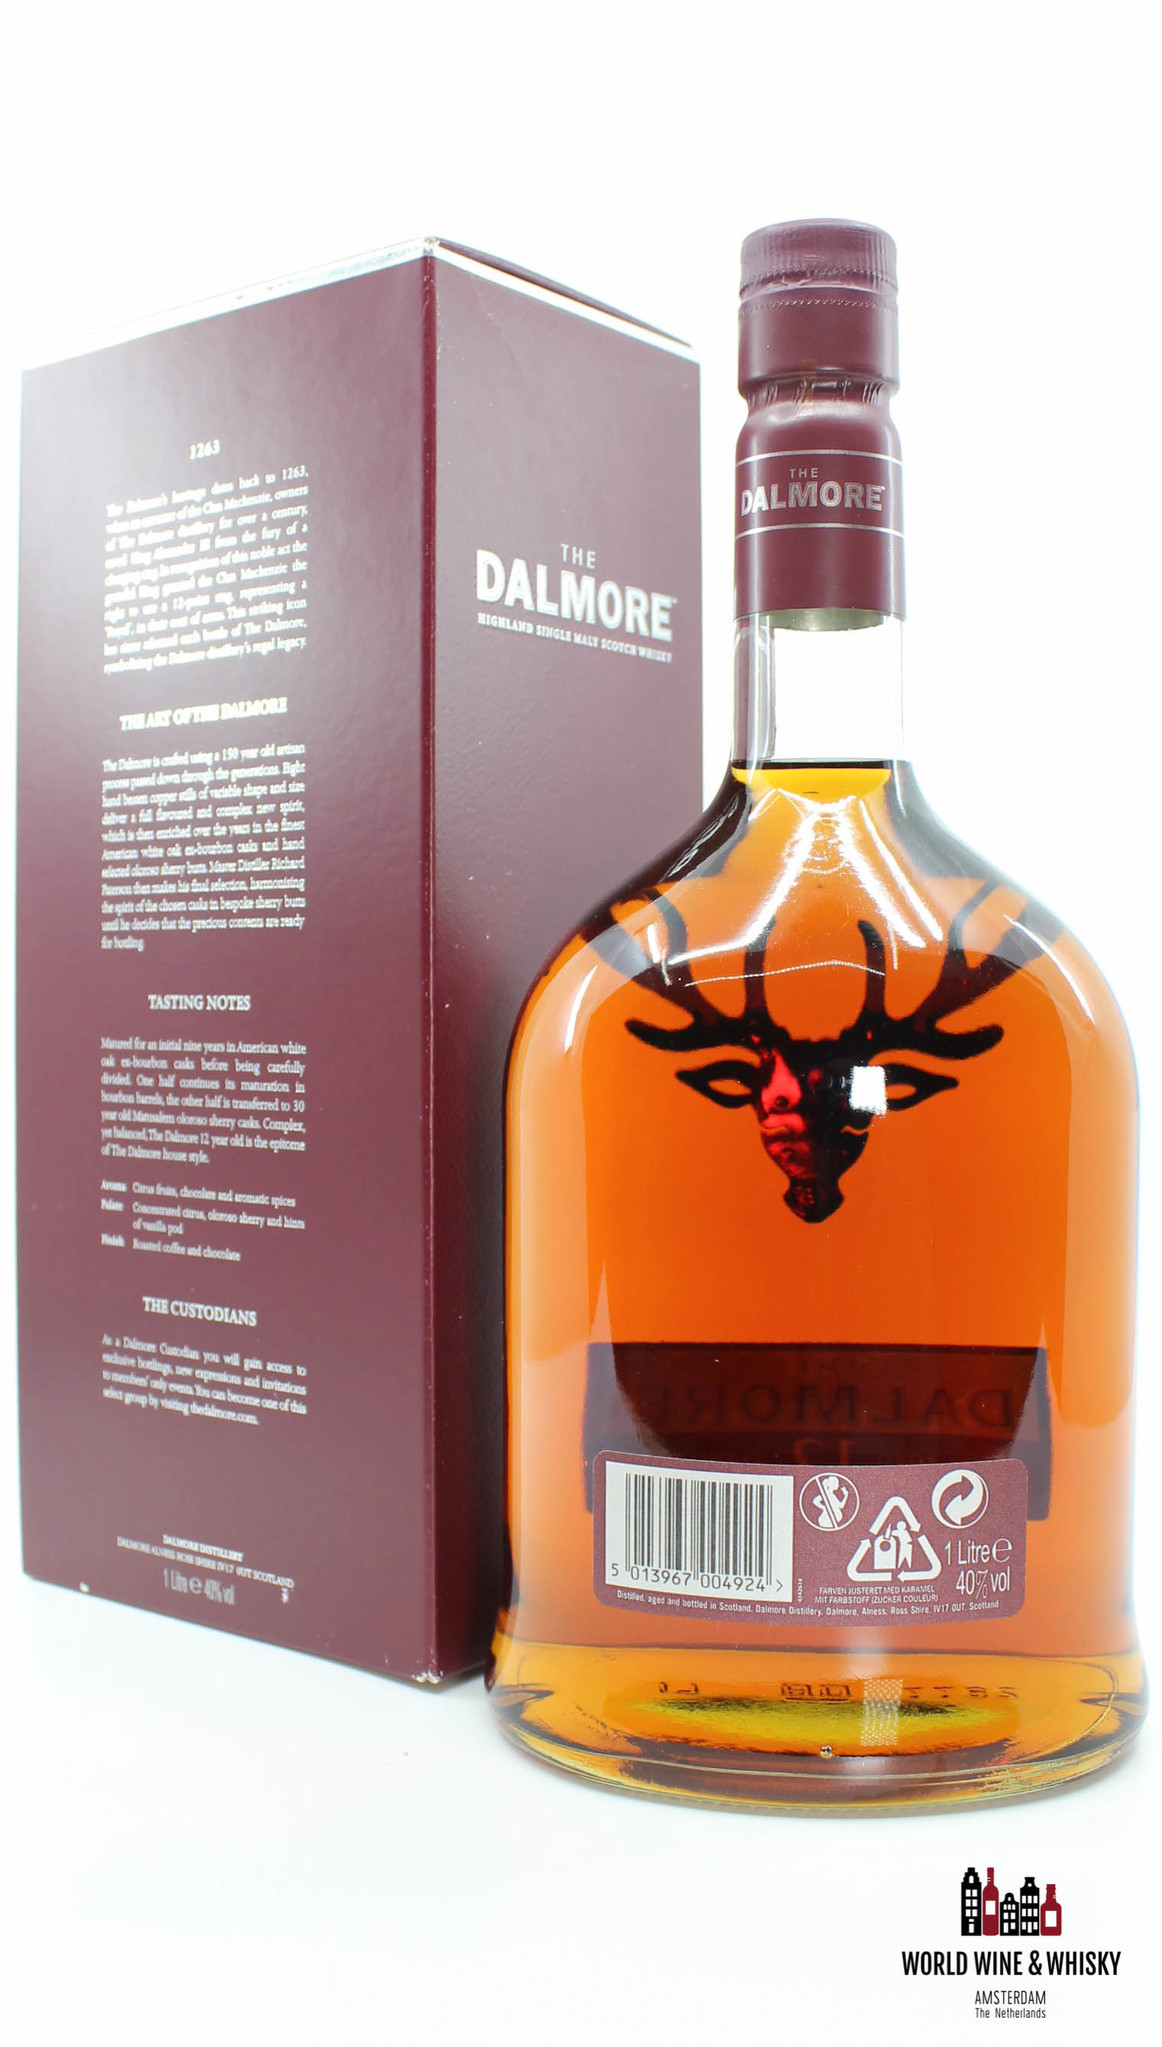 Dalmore 12 Years Old 40% 1 Litre (1000 ml) at World Wine & Whisky World Wine & Whisky